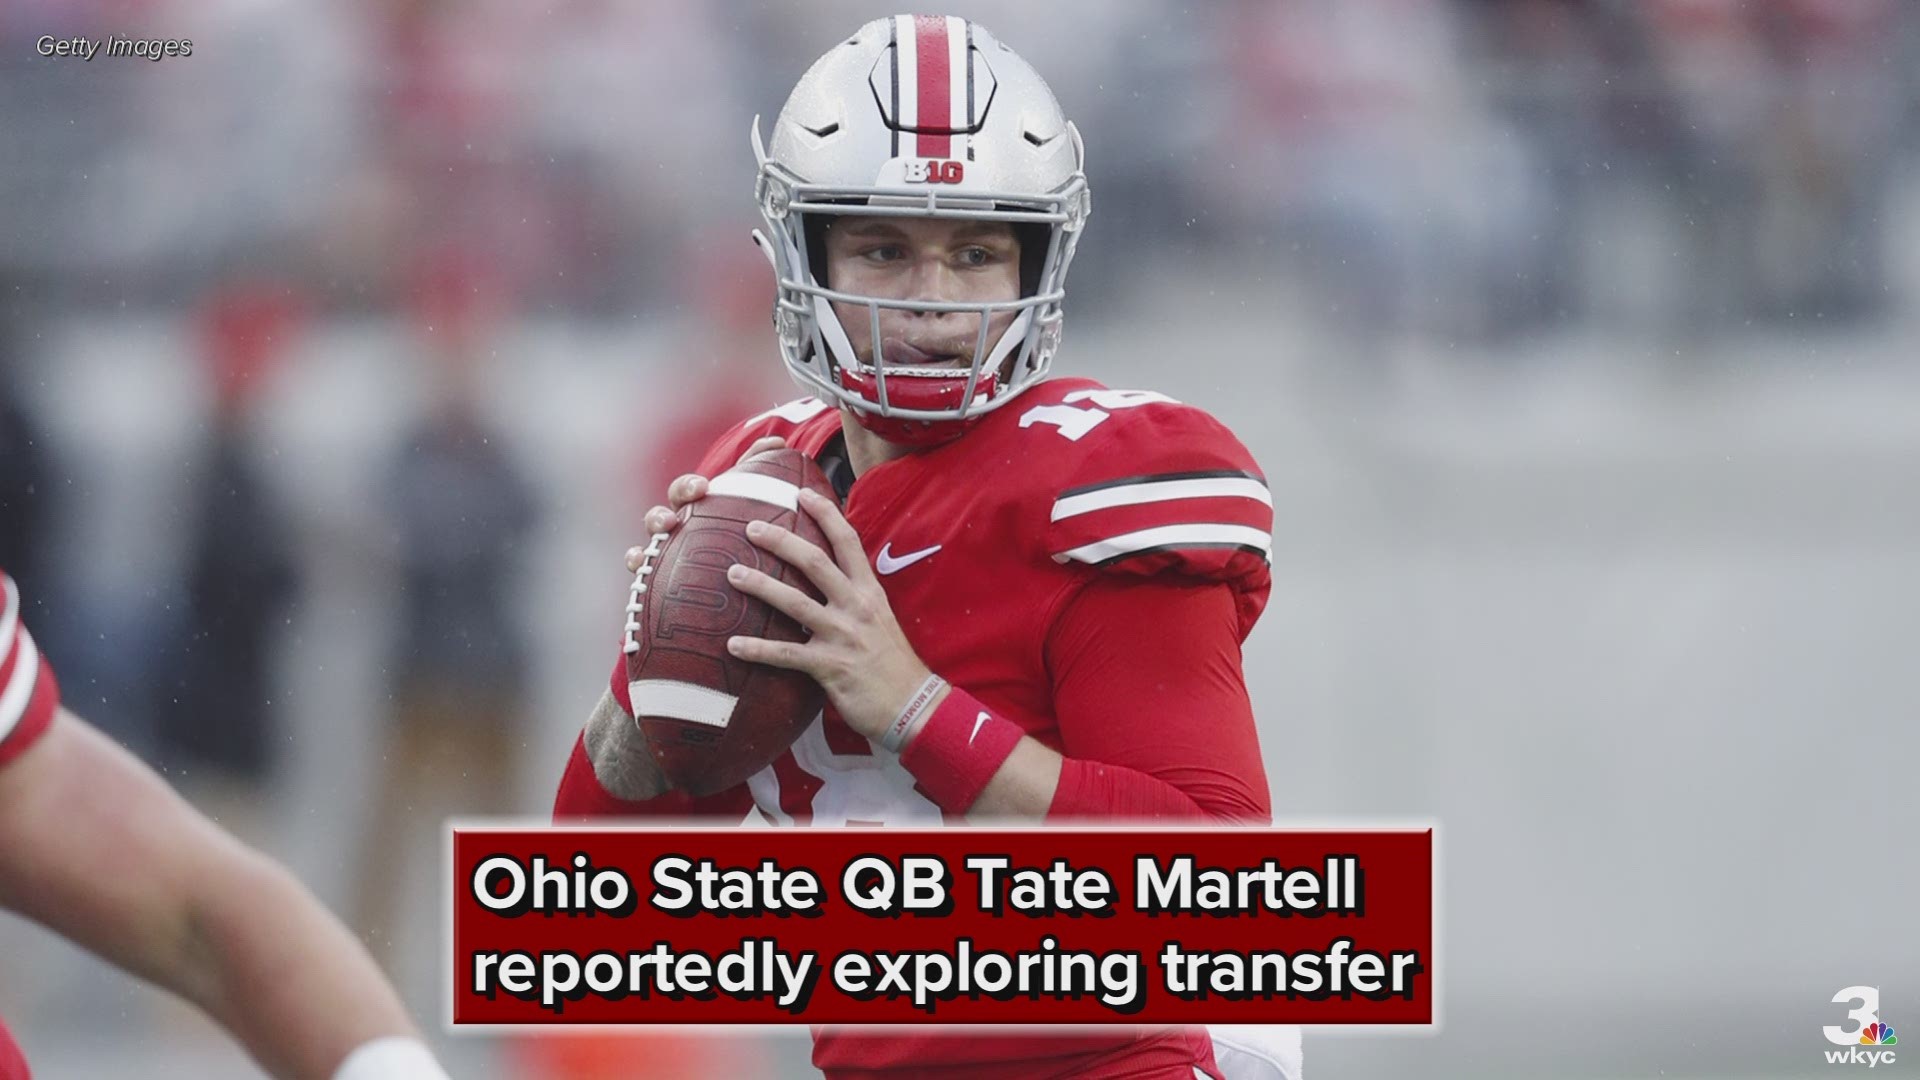 According to multiple reports, Ohio State Tate Martell has entered the NCAA's transfer portal, less than a week after Justin Fields joined the Buckeyes program.